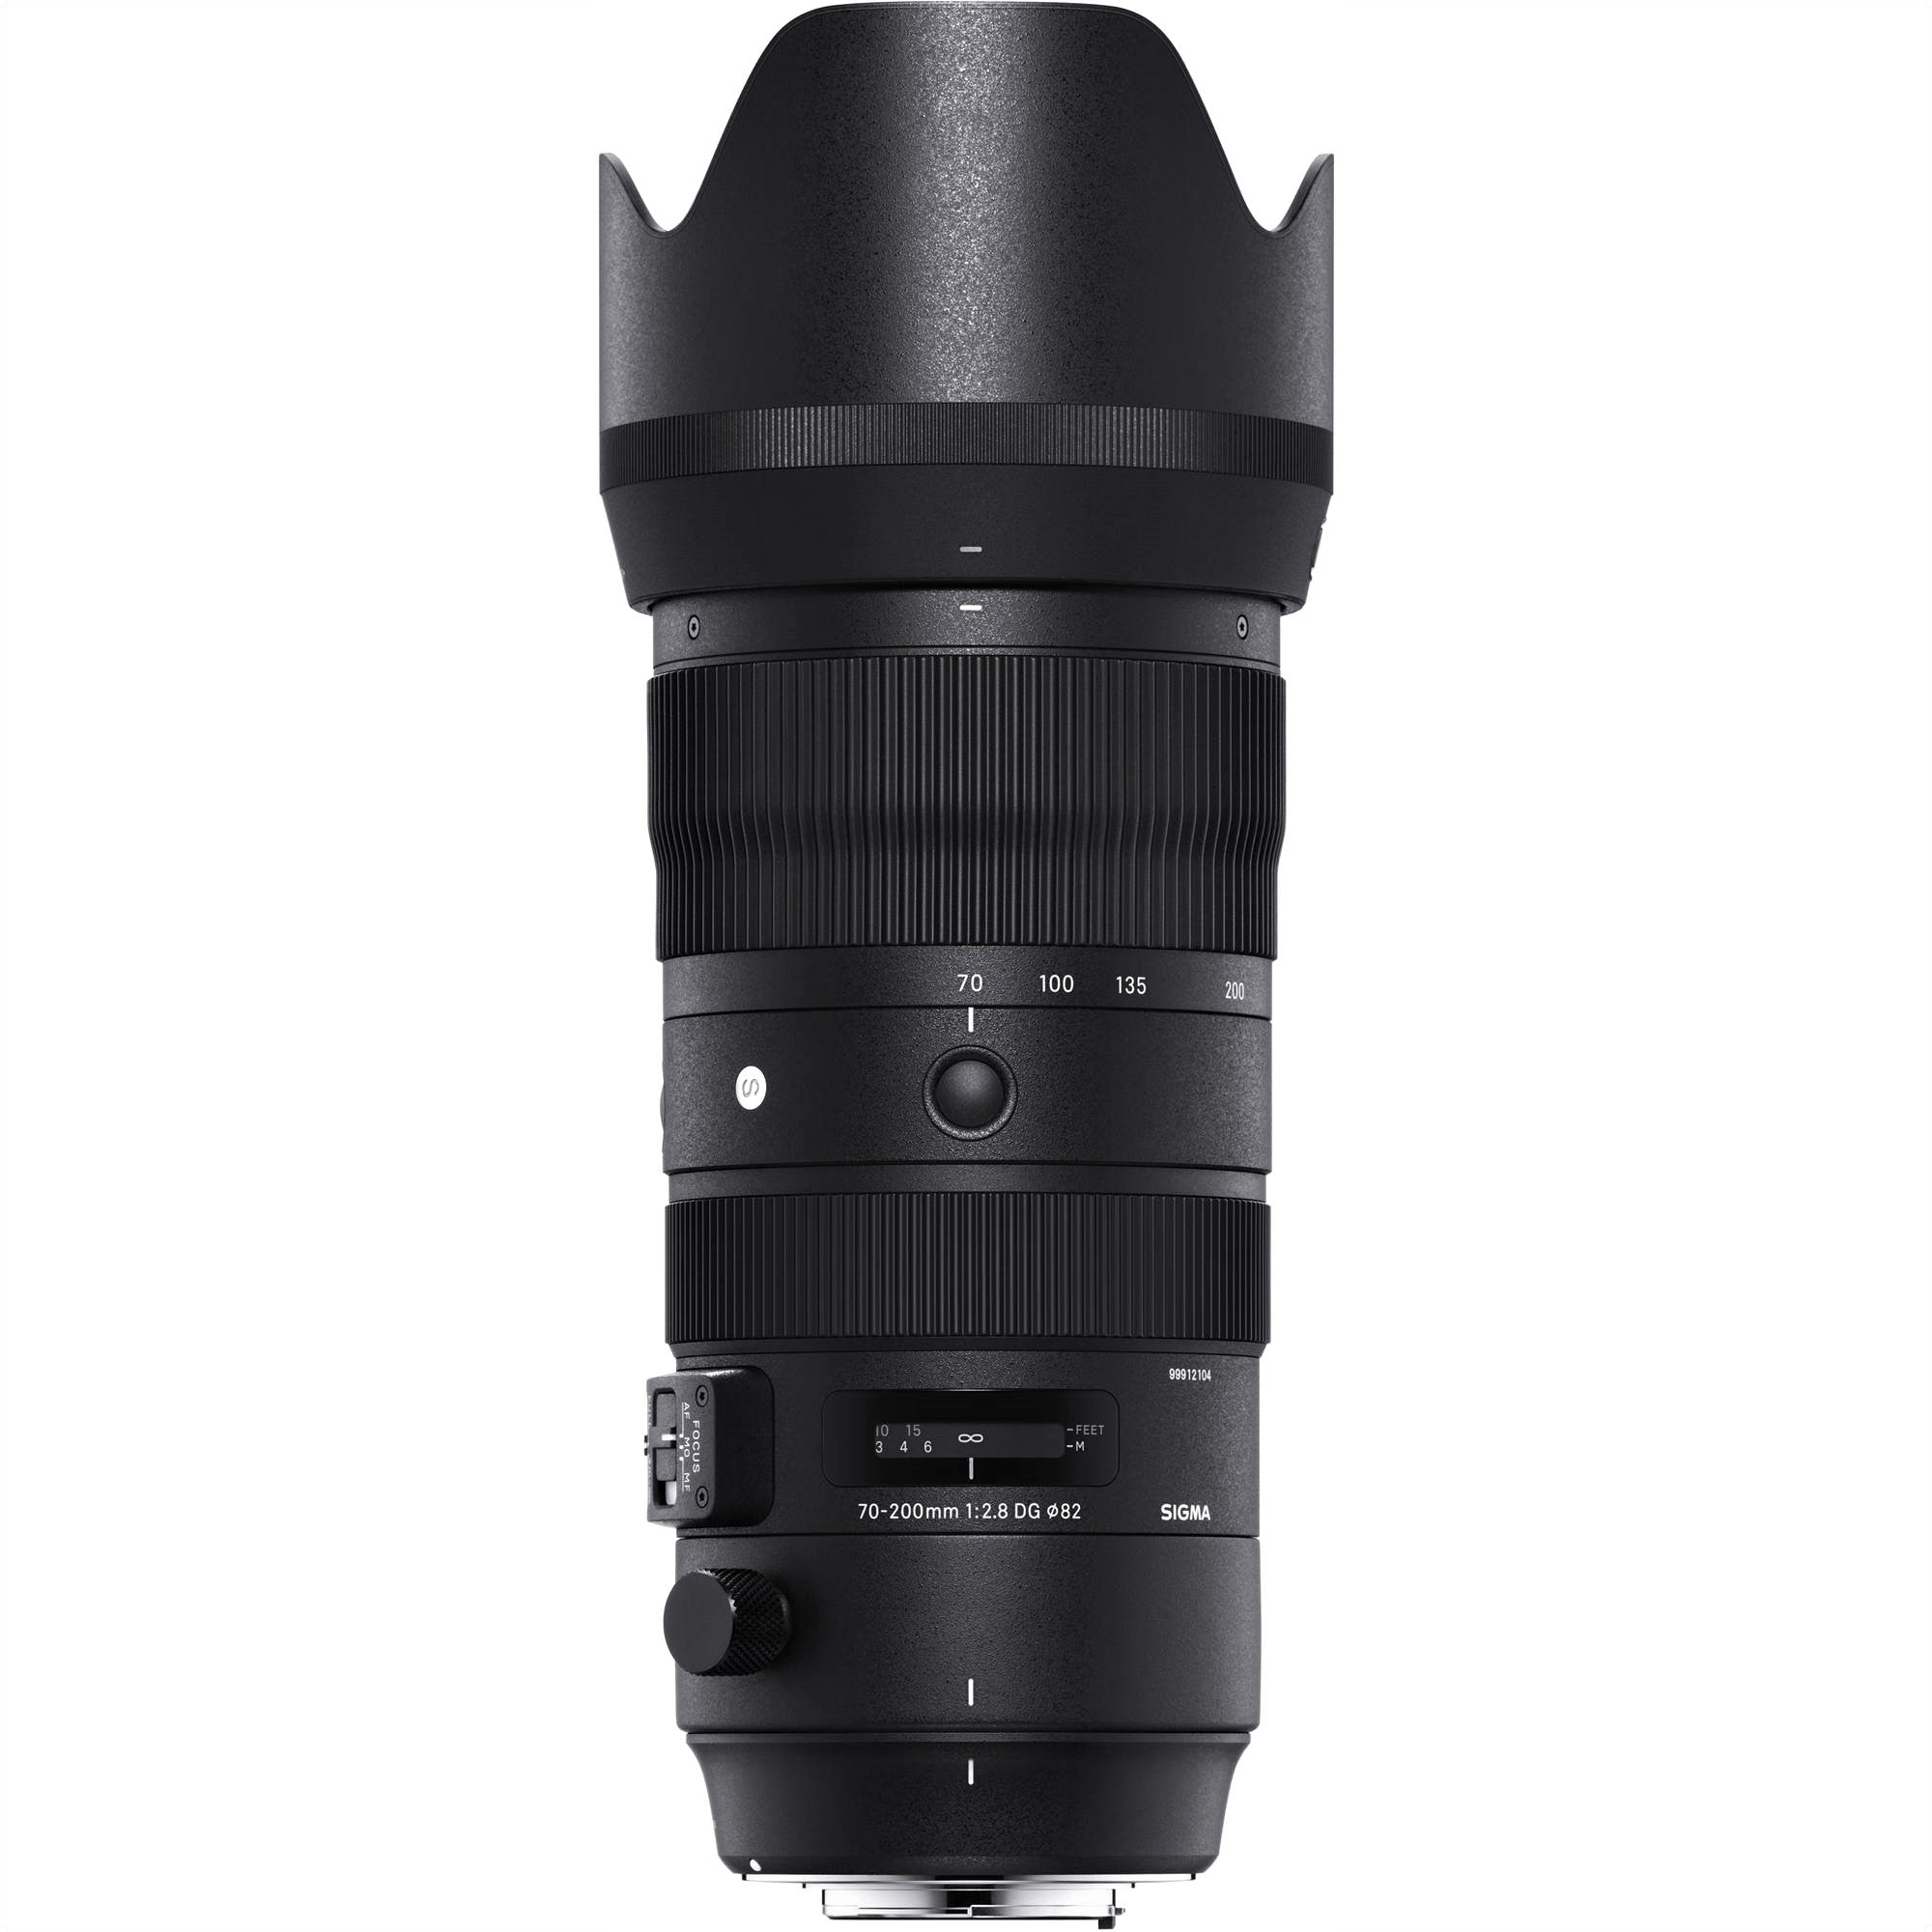 Sigma 70-200mm F2.8 DG OS HSM Sports Lens (Canon EF Mount) with Attached Lens Hood on the Top